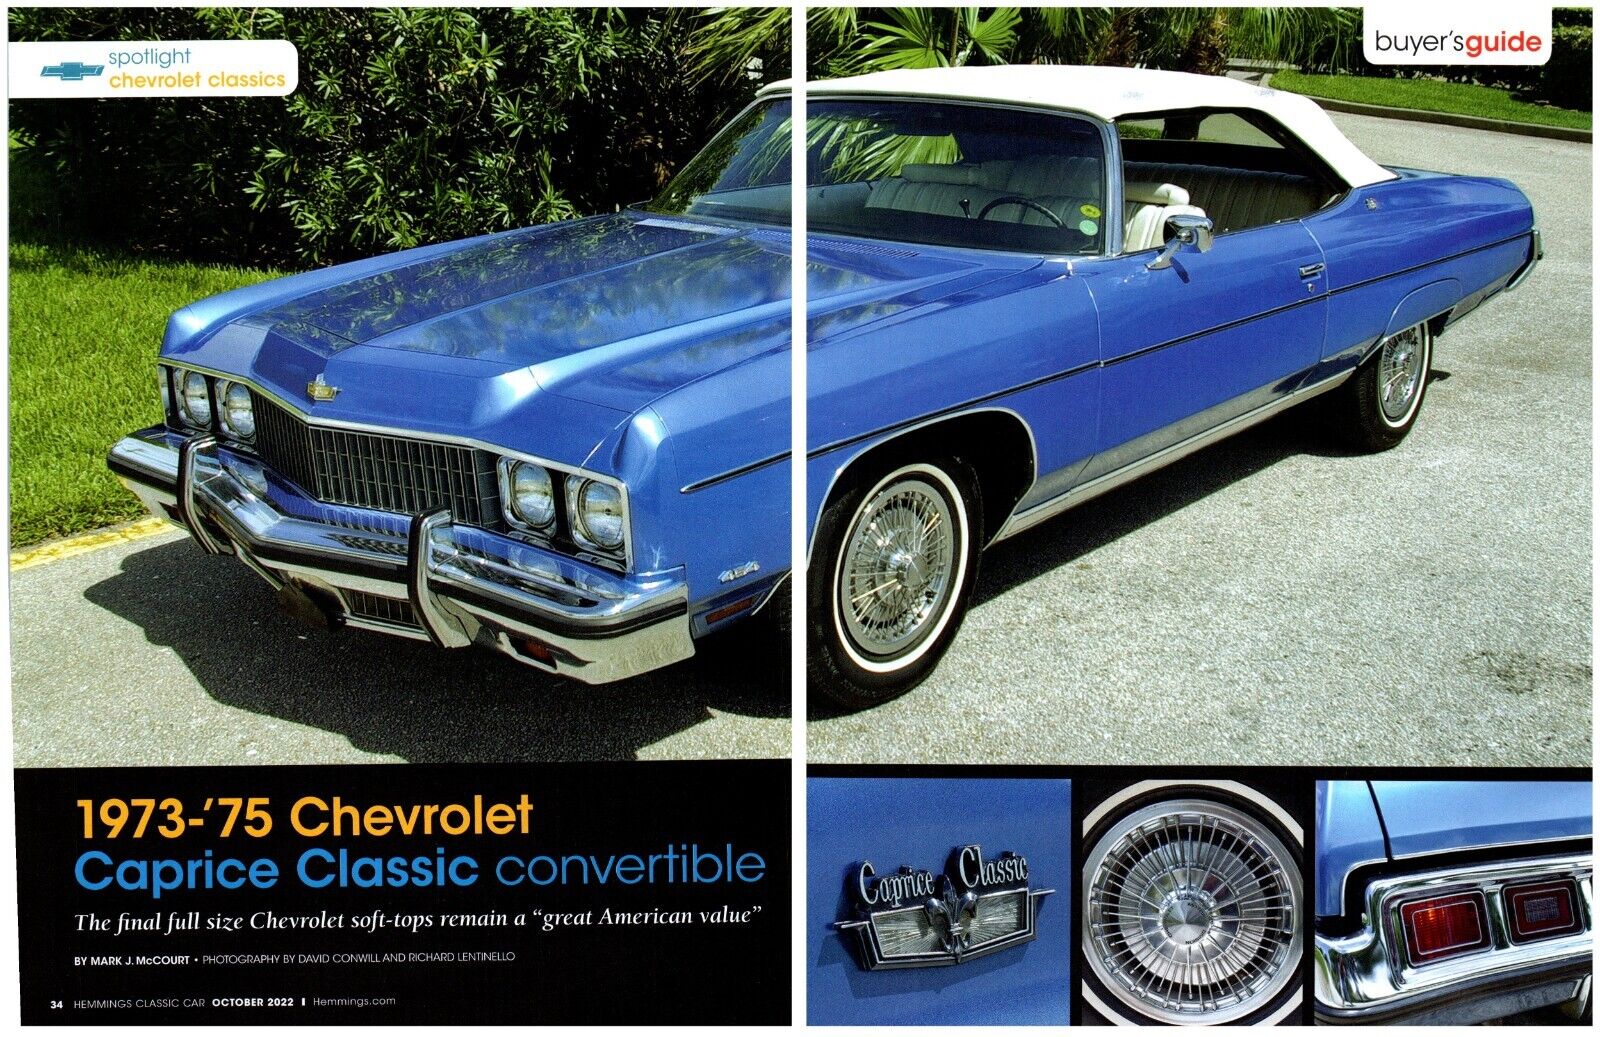 1973 Chevrolet Caprice Classic Convertible 2 Page Print Centerfold 8x11\